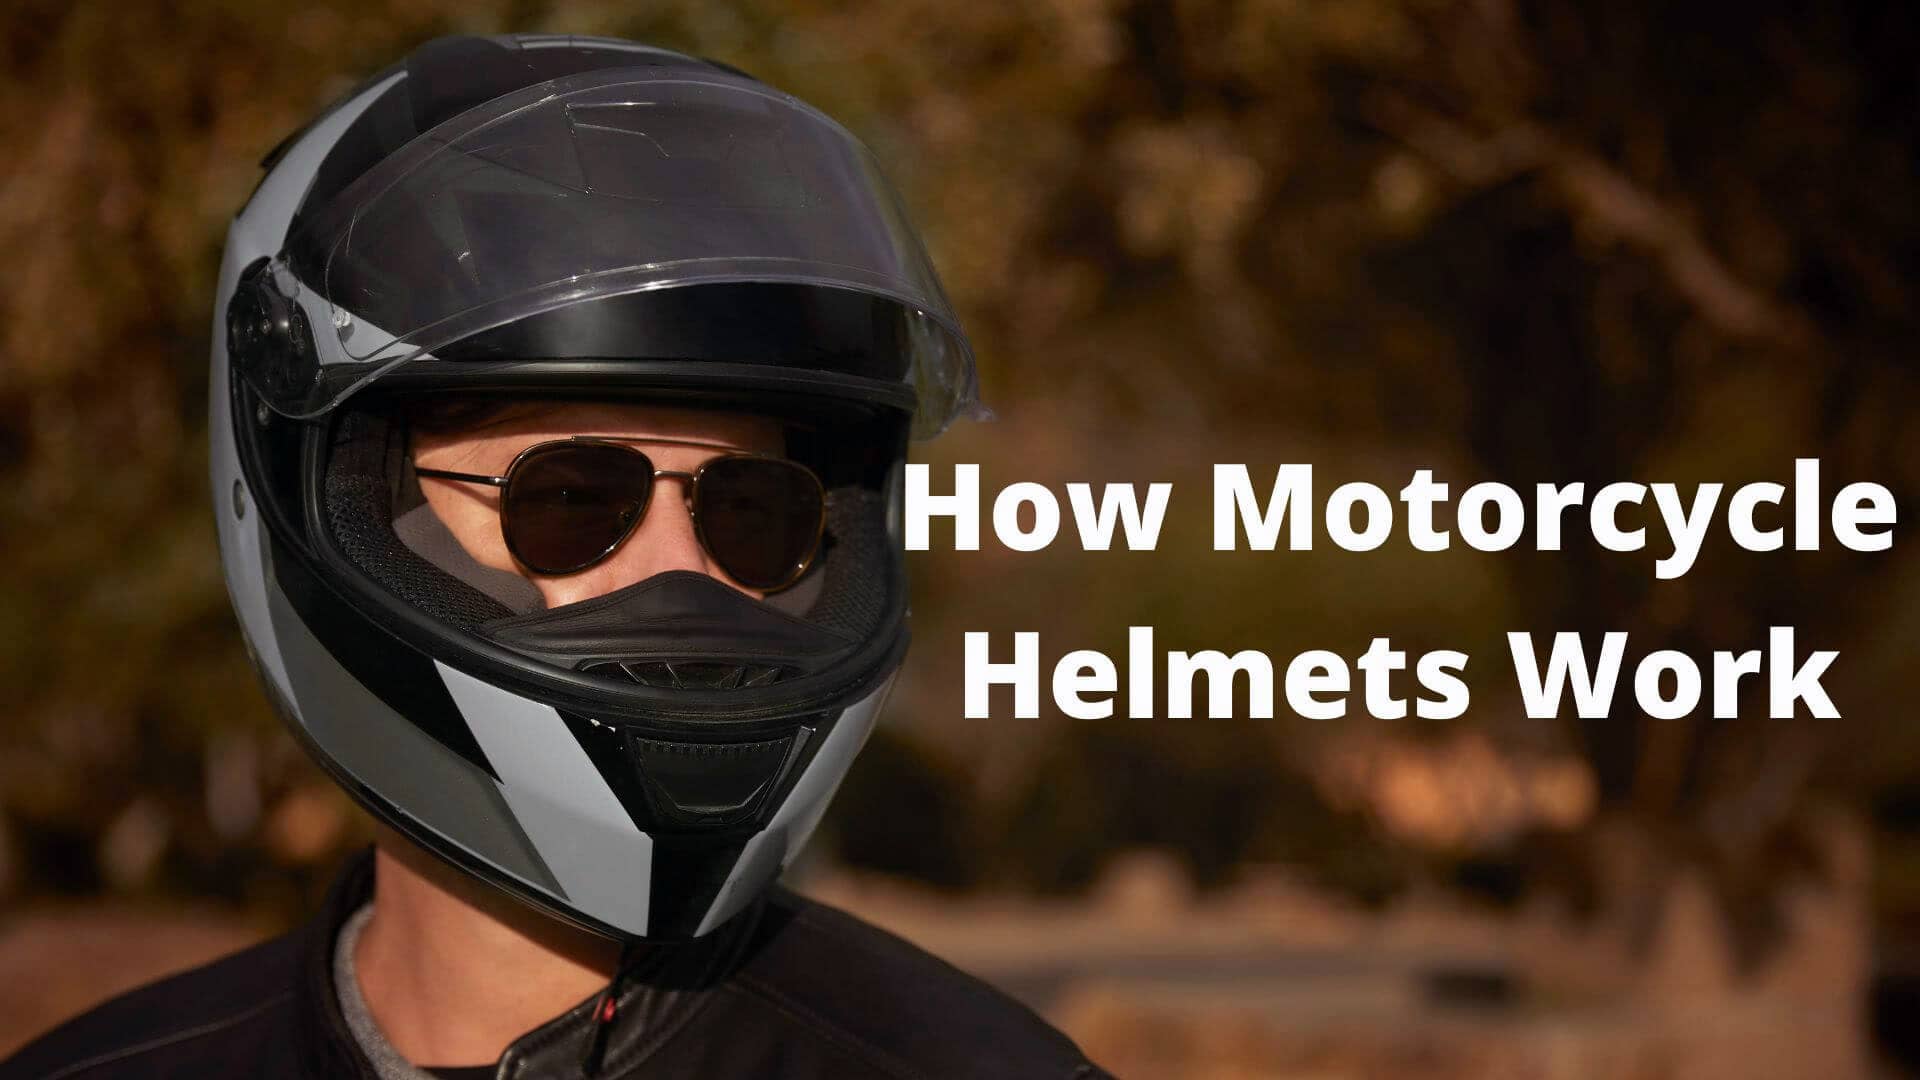 How Motorcycle Helmets Work To Keep You Safe.